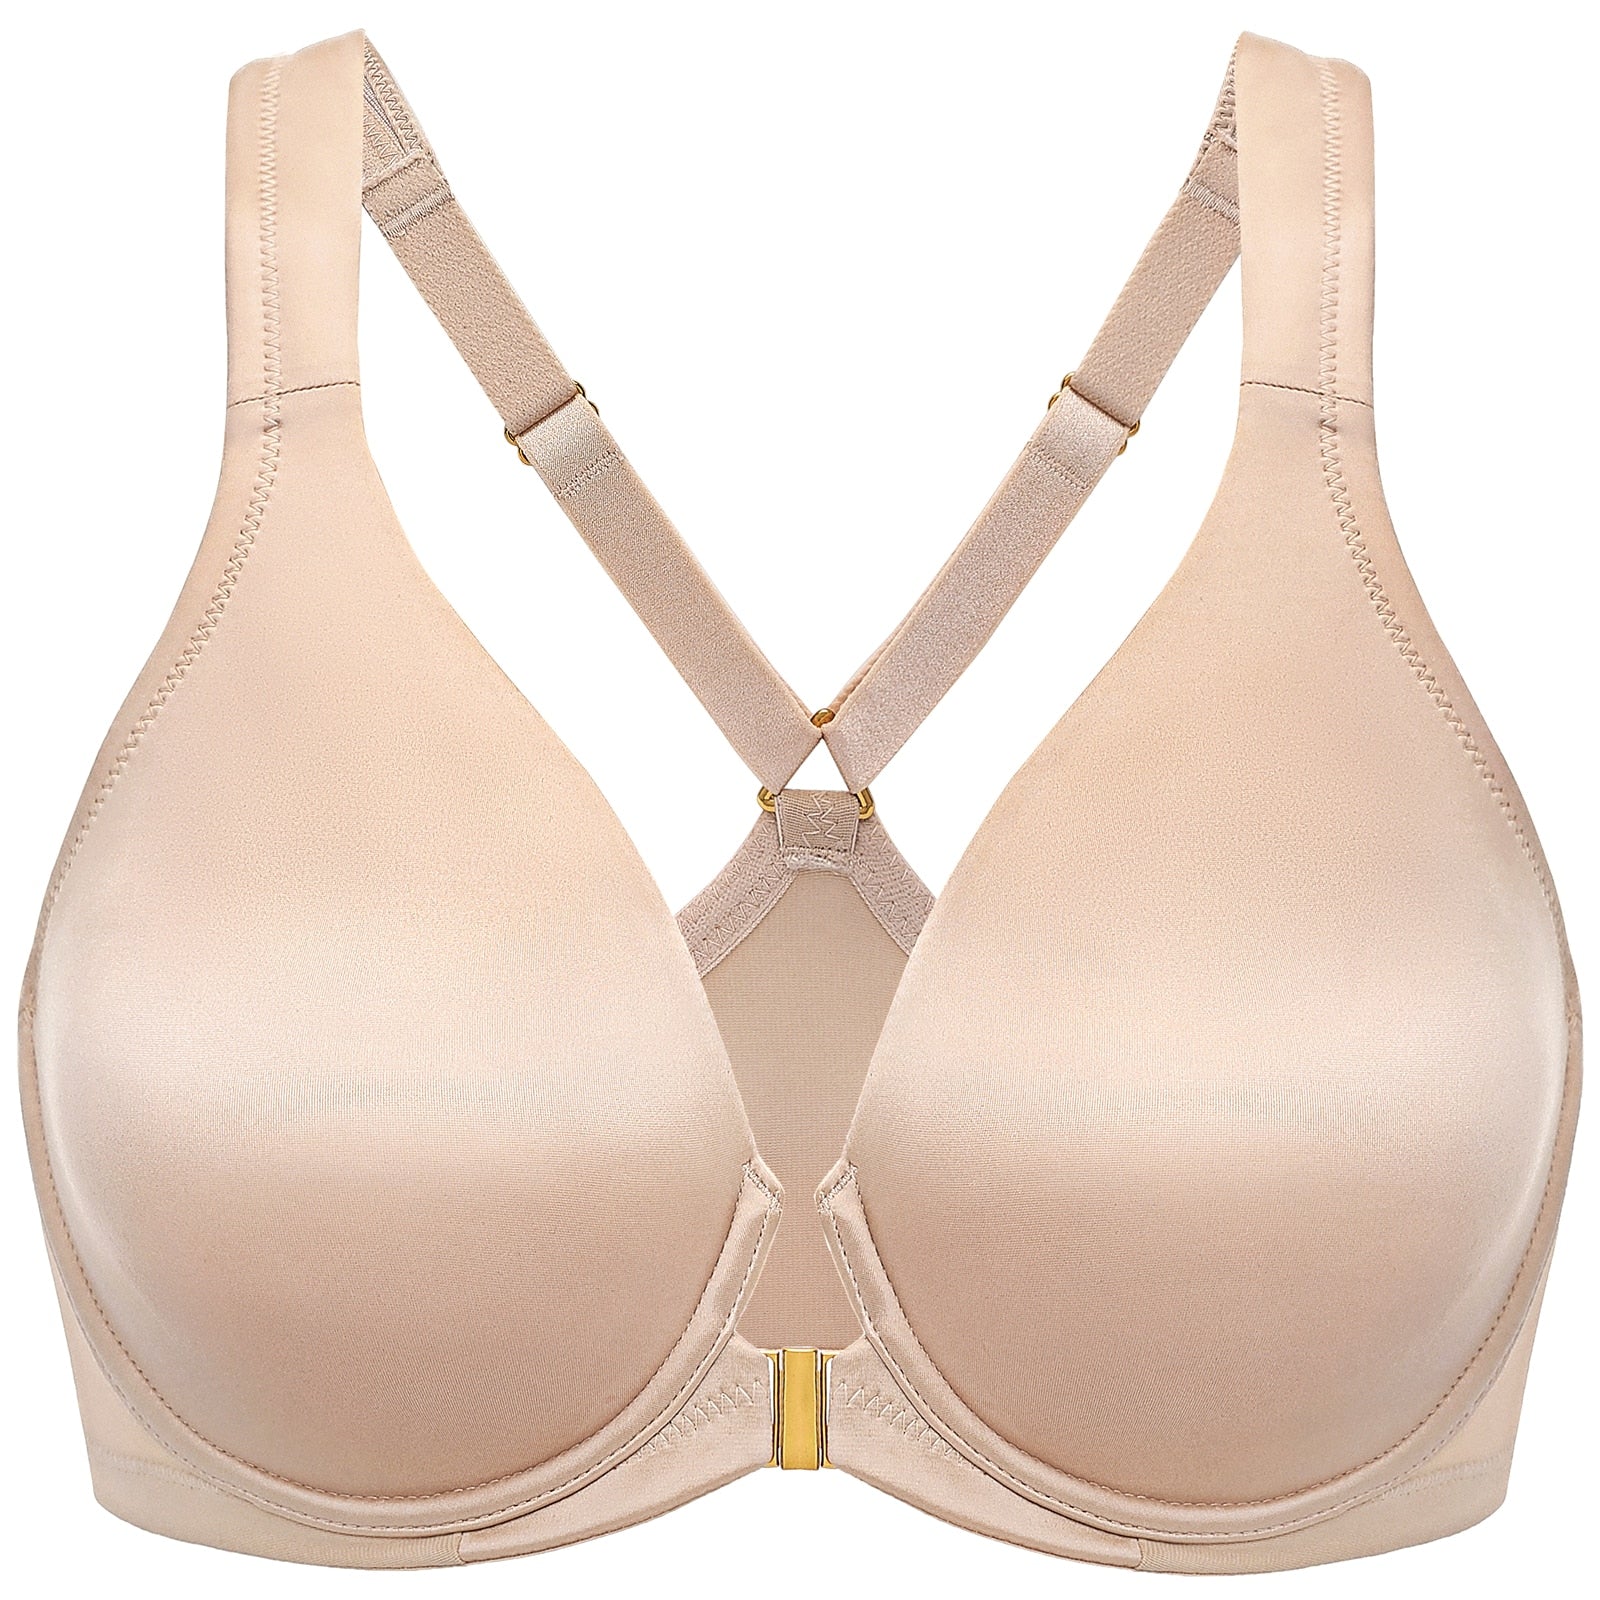 SS Online Trading - SSHK Shop - Plus size front closure seamless underwired bra (34C-44G)